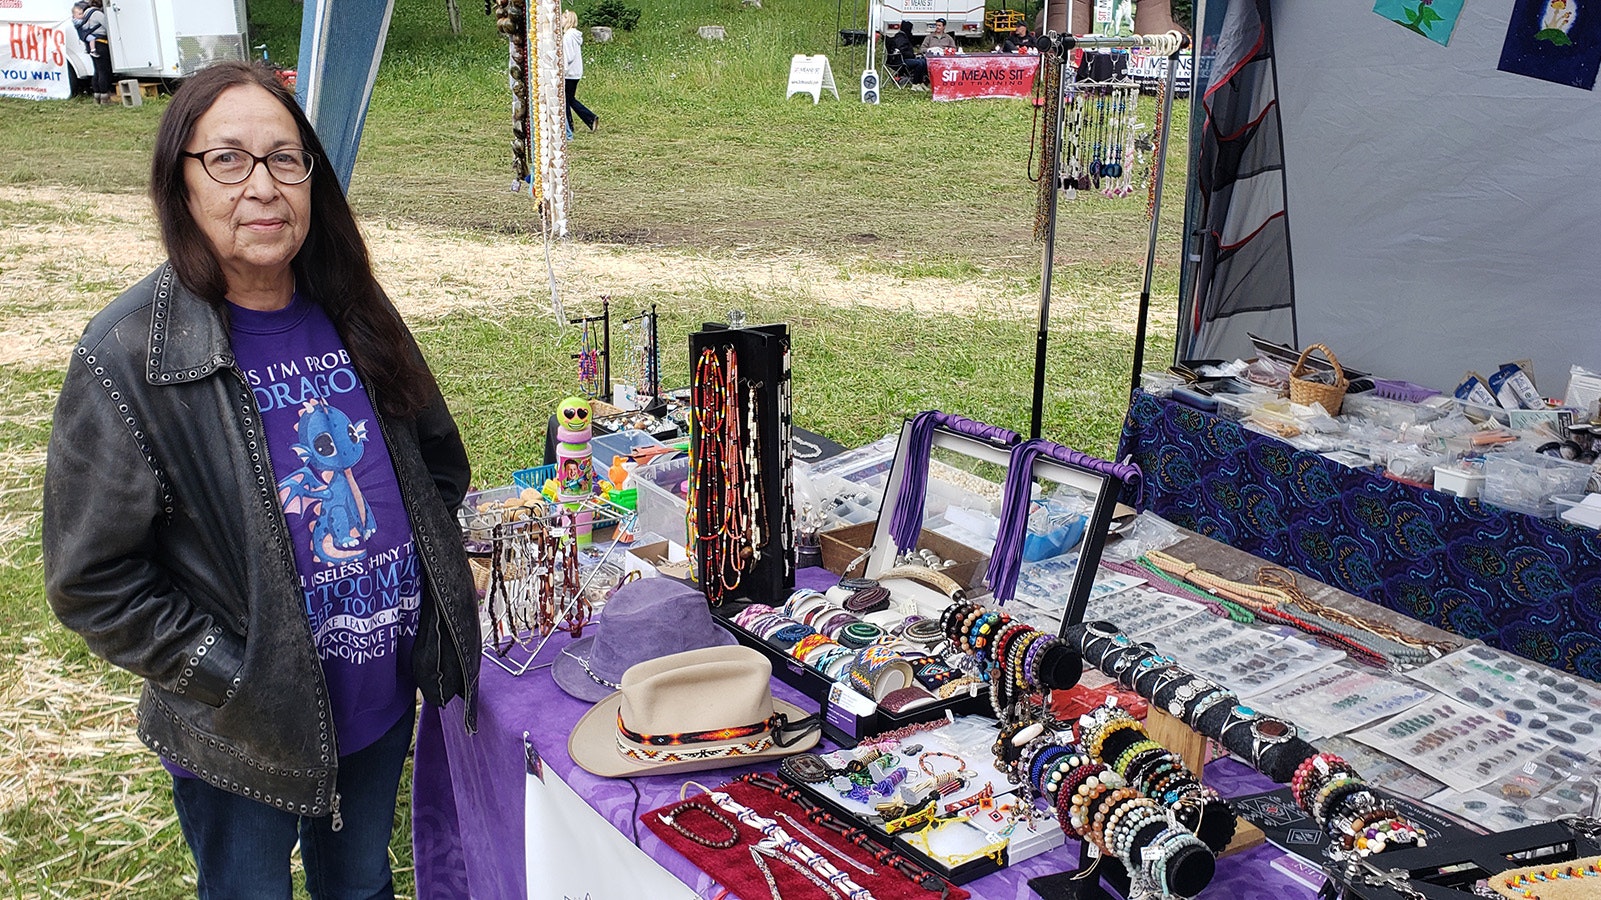 Sheryl McLaughlin poses with a table full of her beadwork and jewelry. She's been a mainstay vendor at the Beartrap Summer Festival for 25 of its 30-year run.